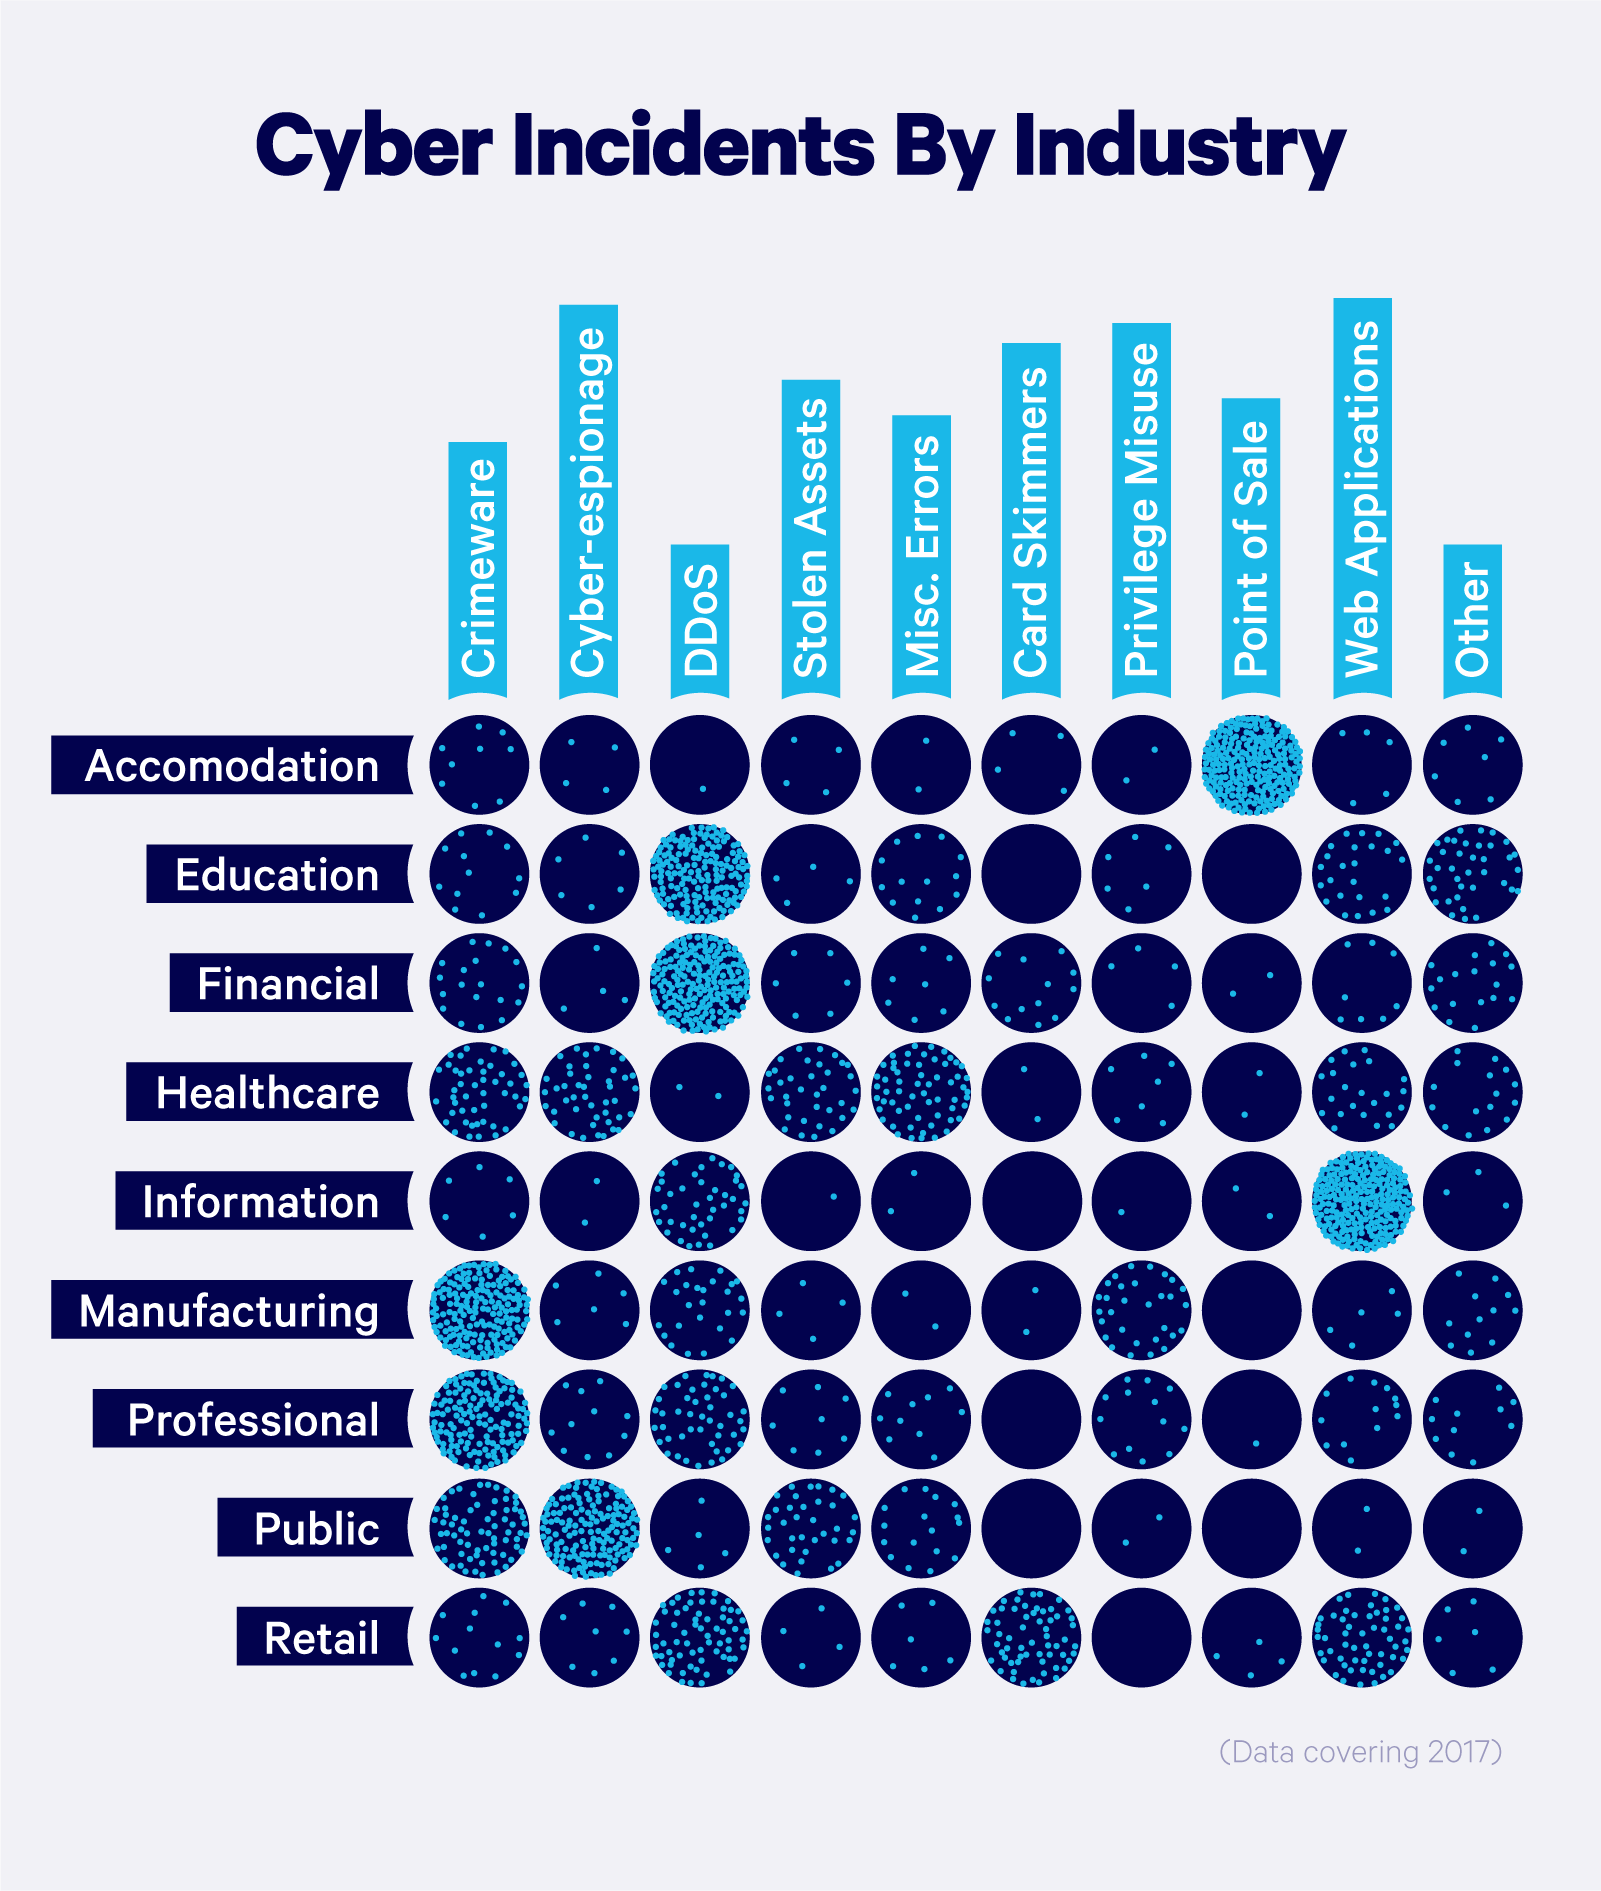 Cyber incidents by industry chart